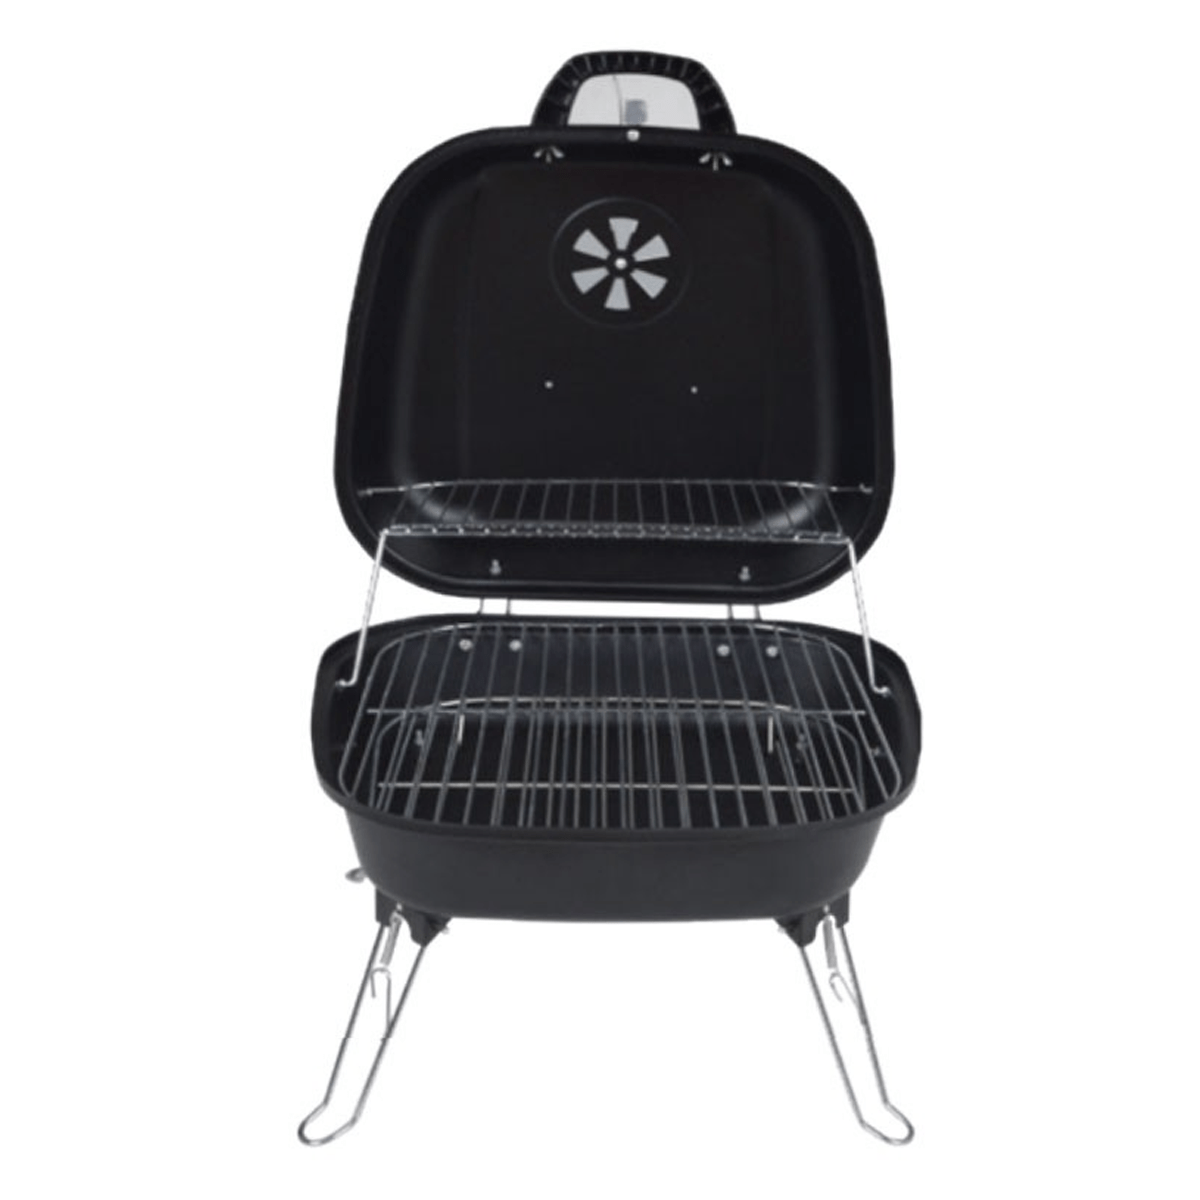 BARBEQUE - CGWI BLACK